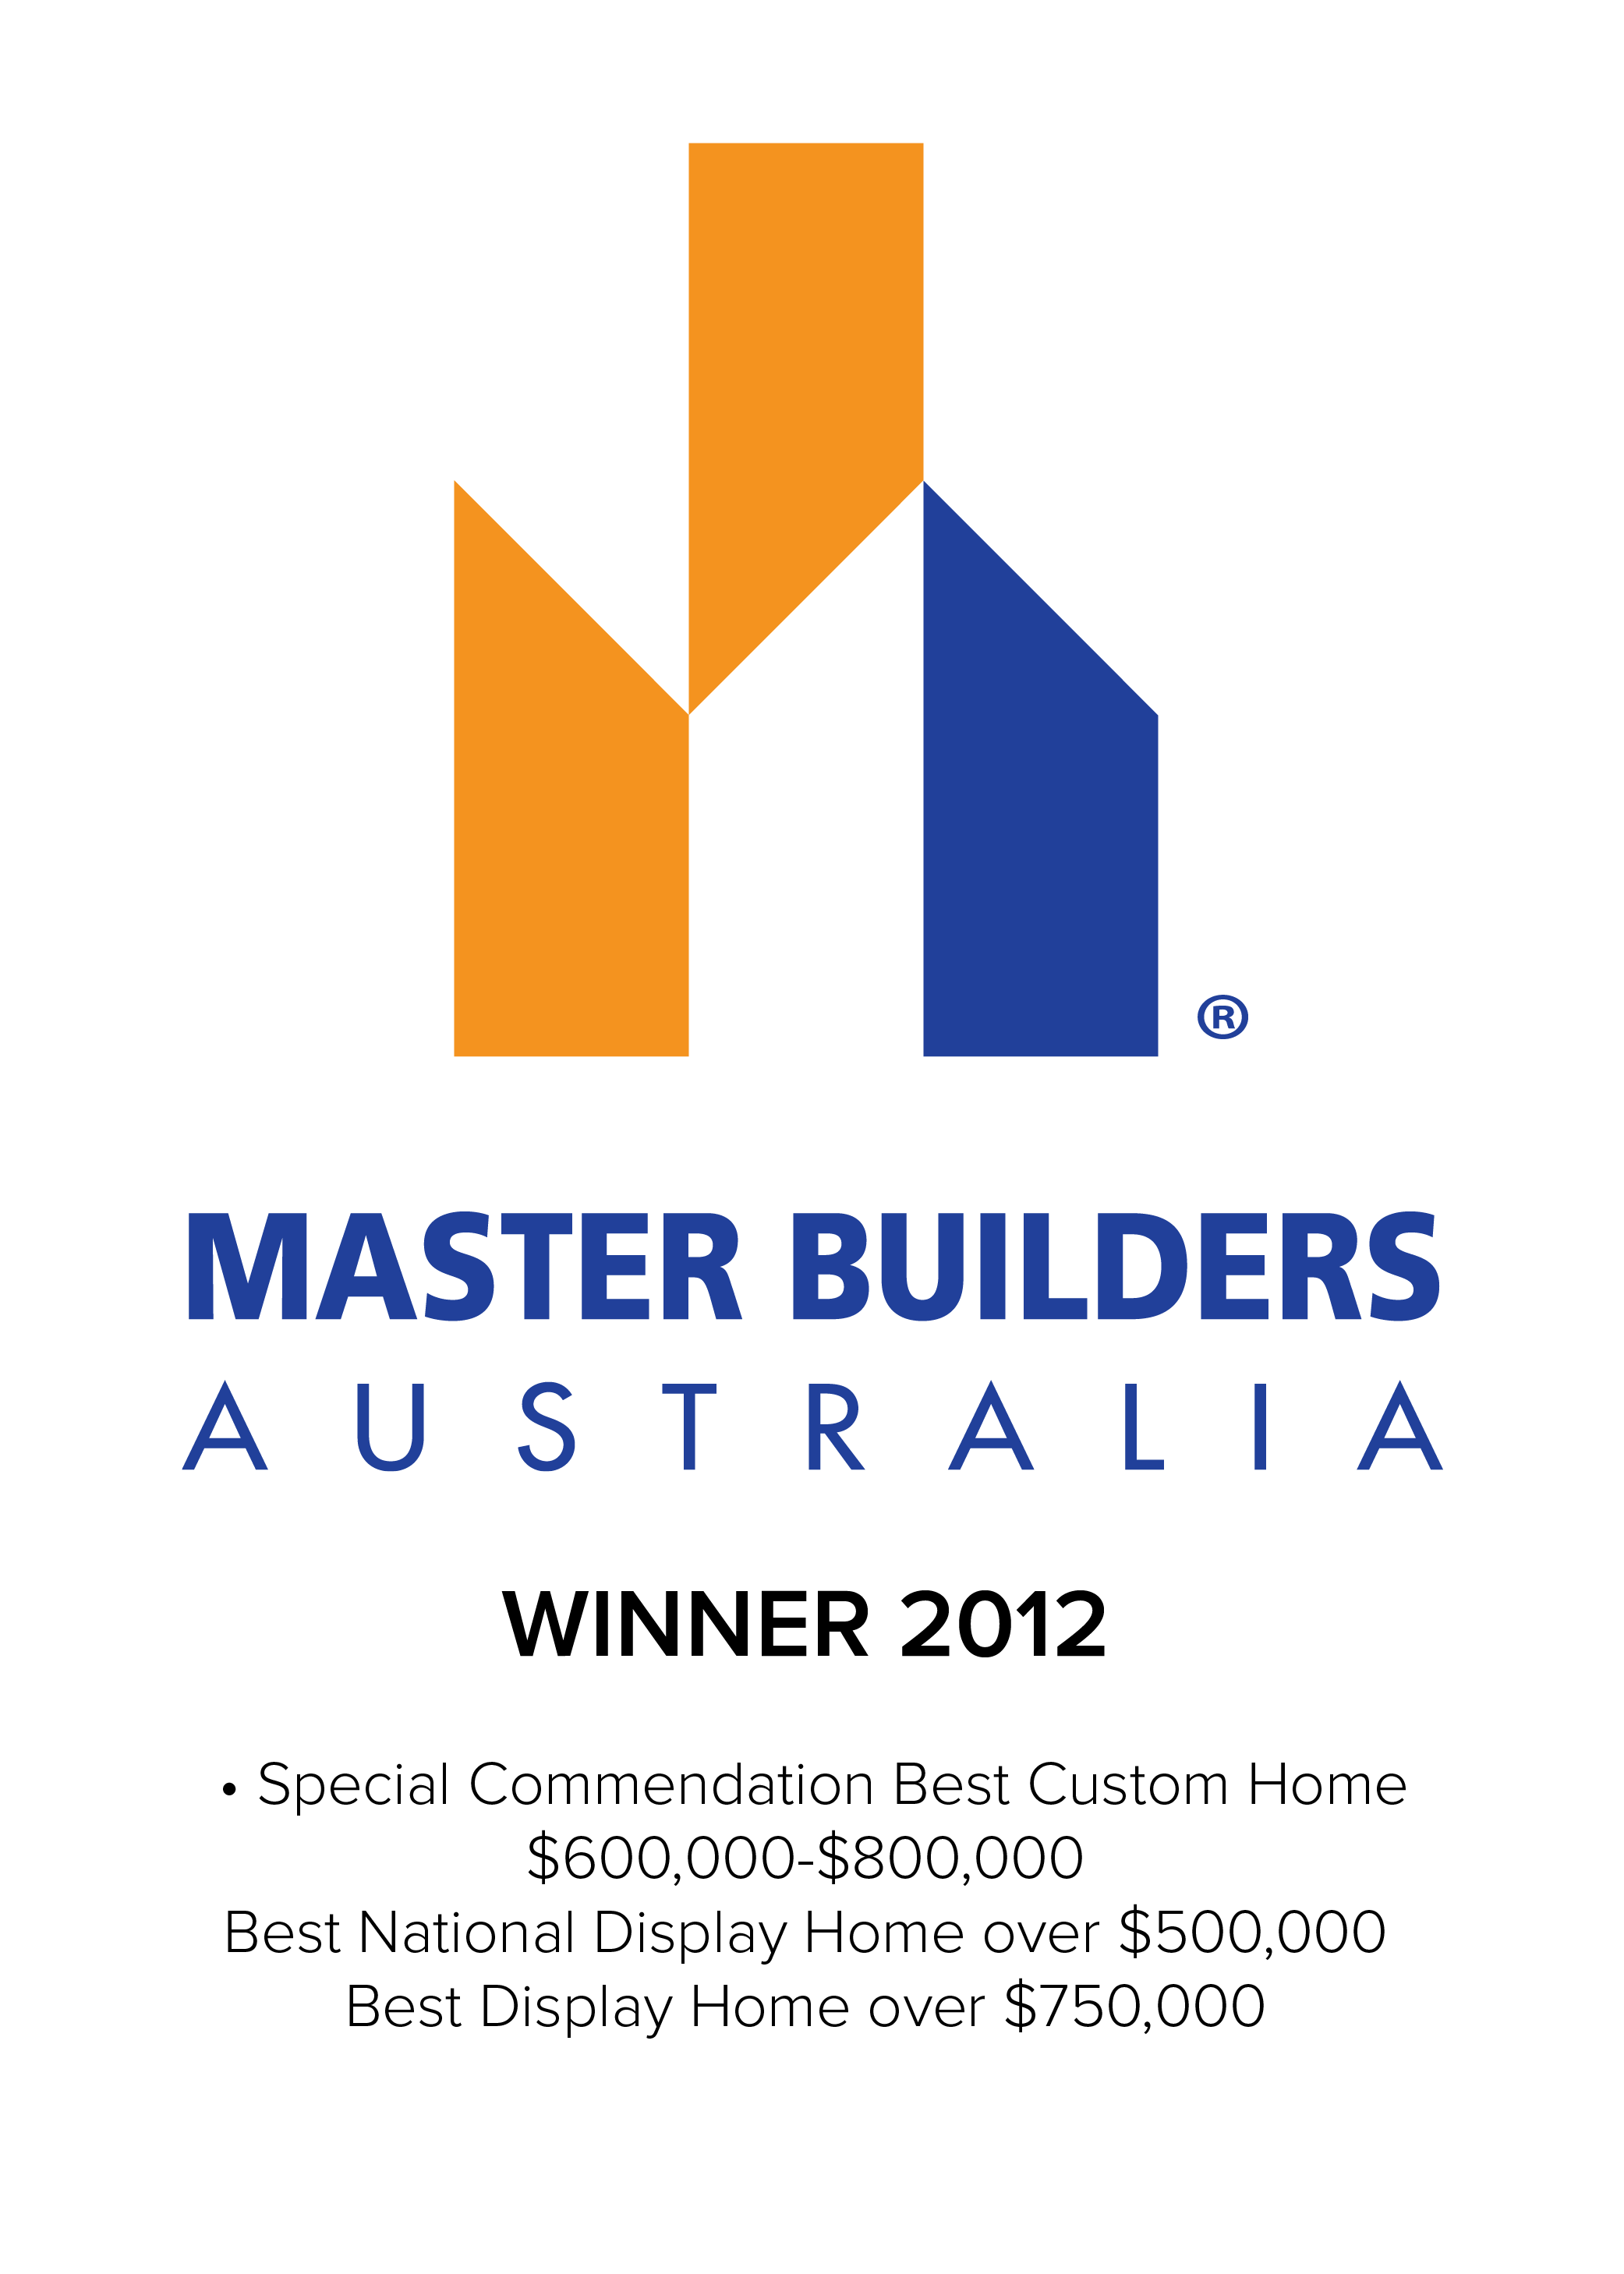 Image of the 2012 Master Builders award given to Englehart.